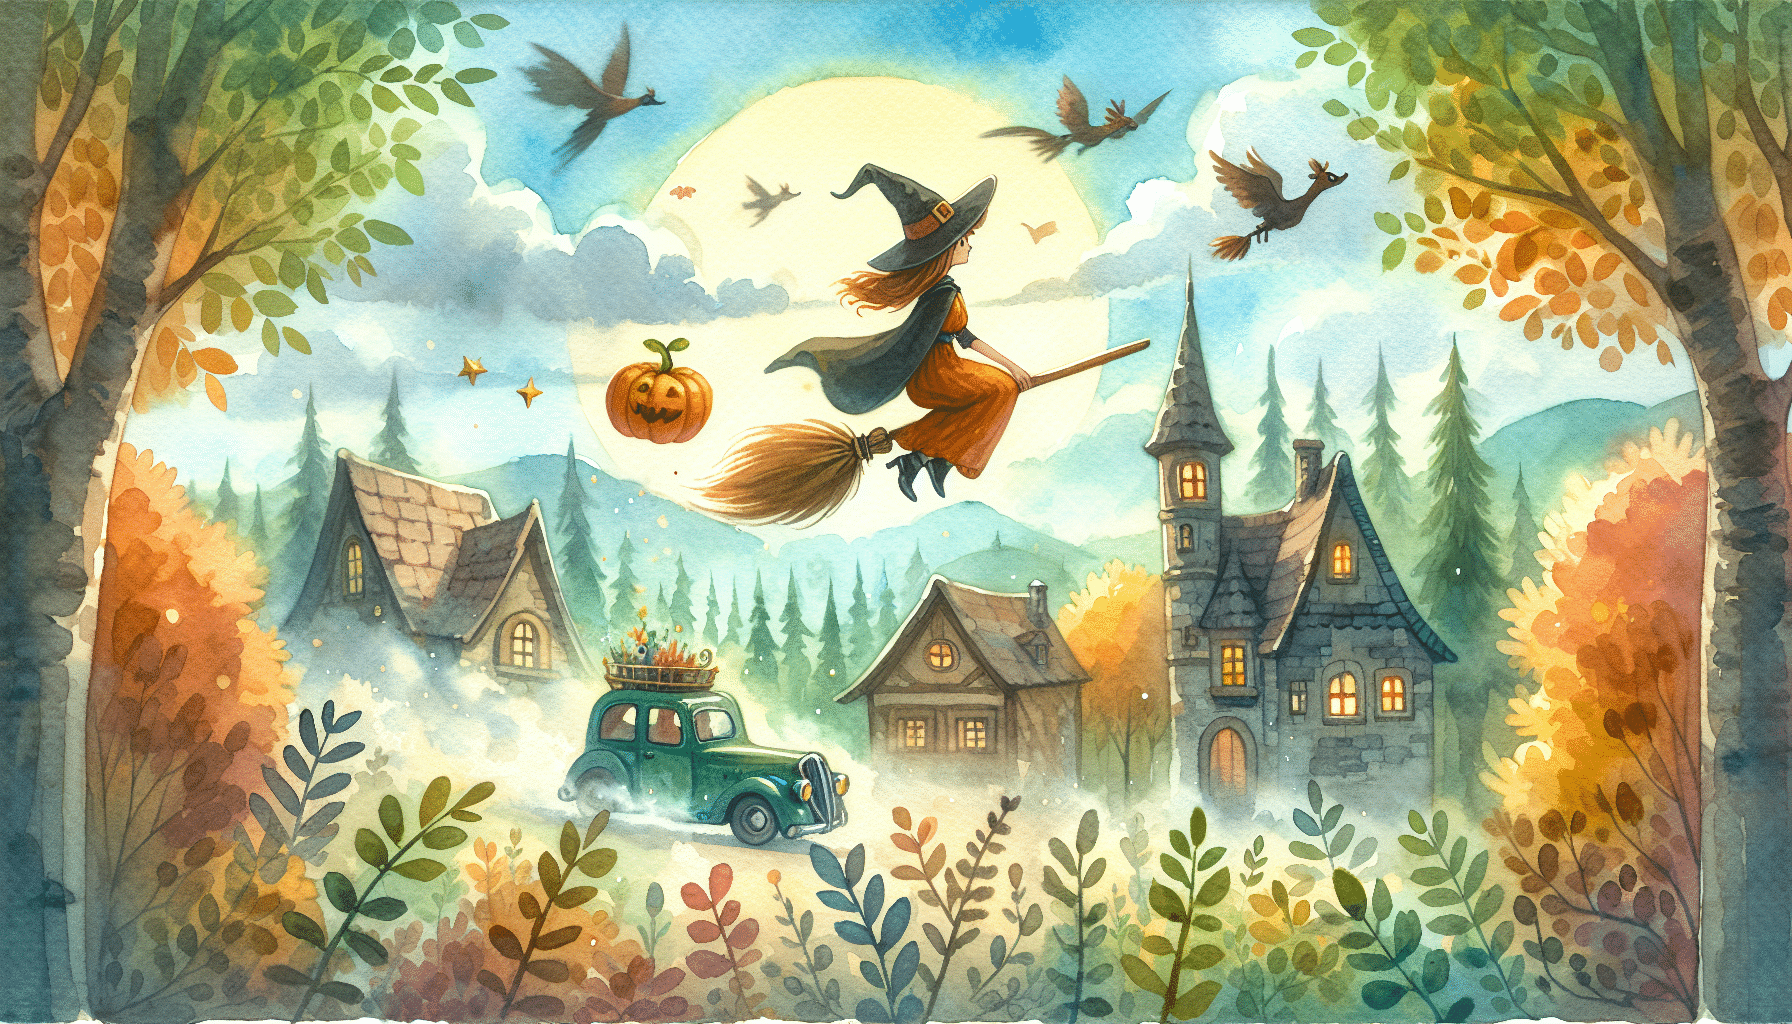 The Enchanted Broomstick Flying into Adventure